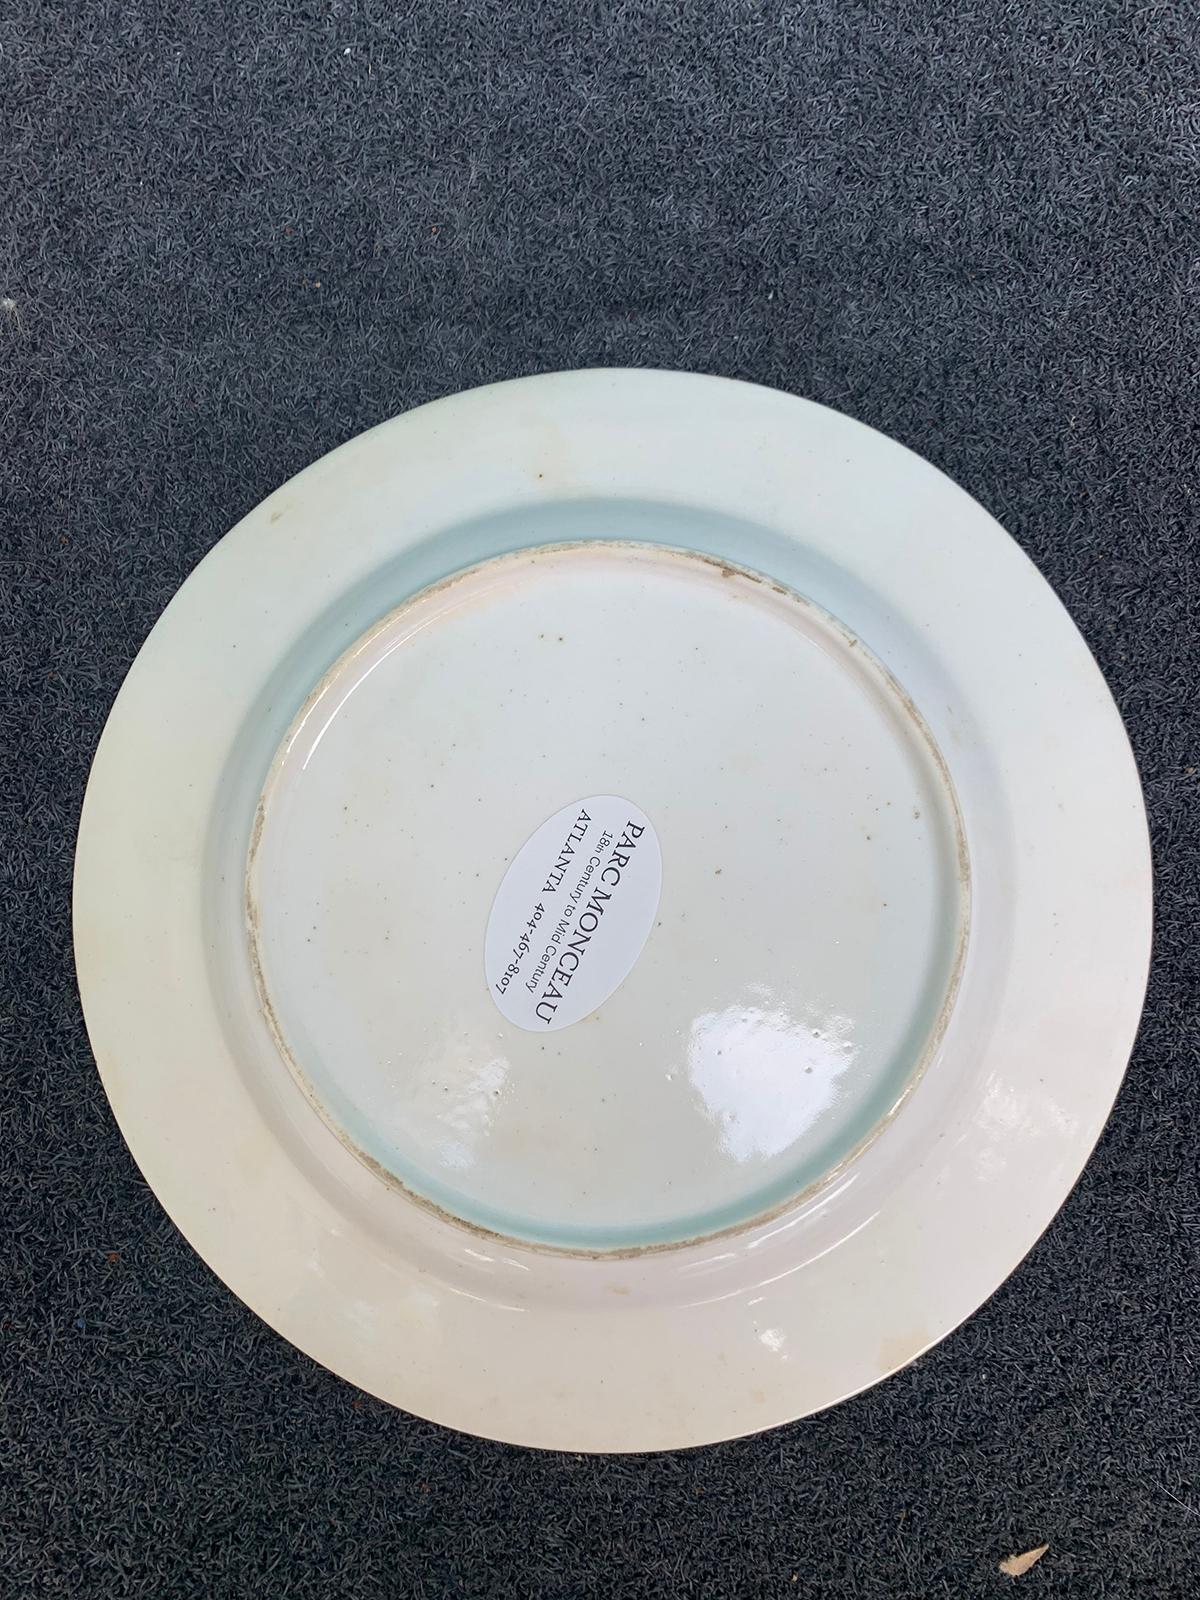 18th Century English Porcelain Plate, Possibly New Hall In Good Condition For Sale In Atlanta, GA